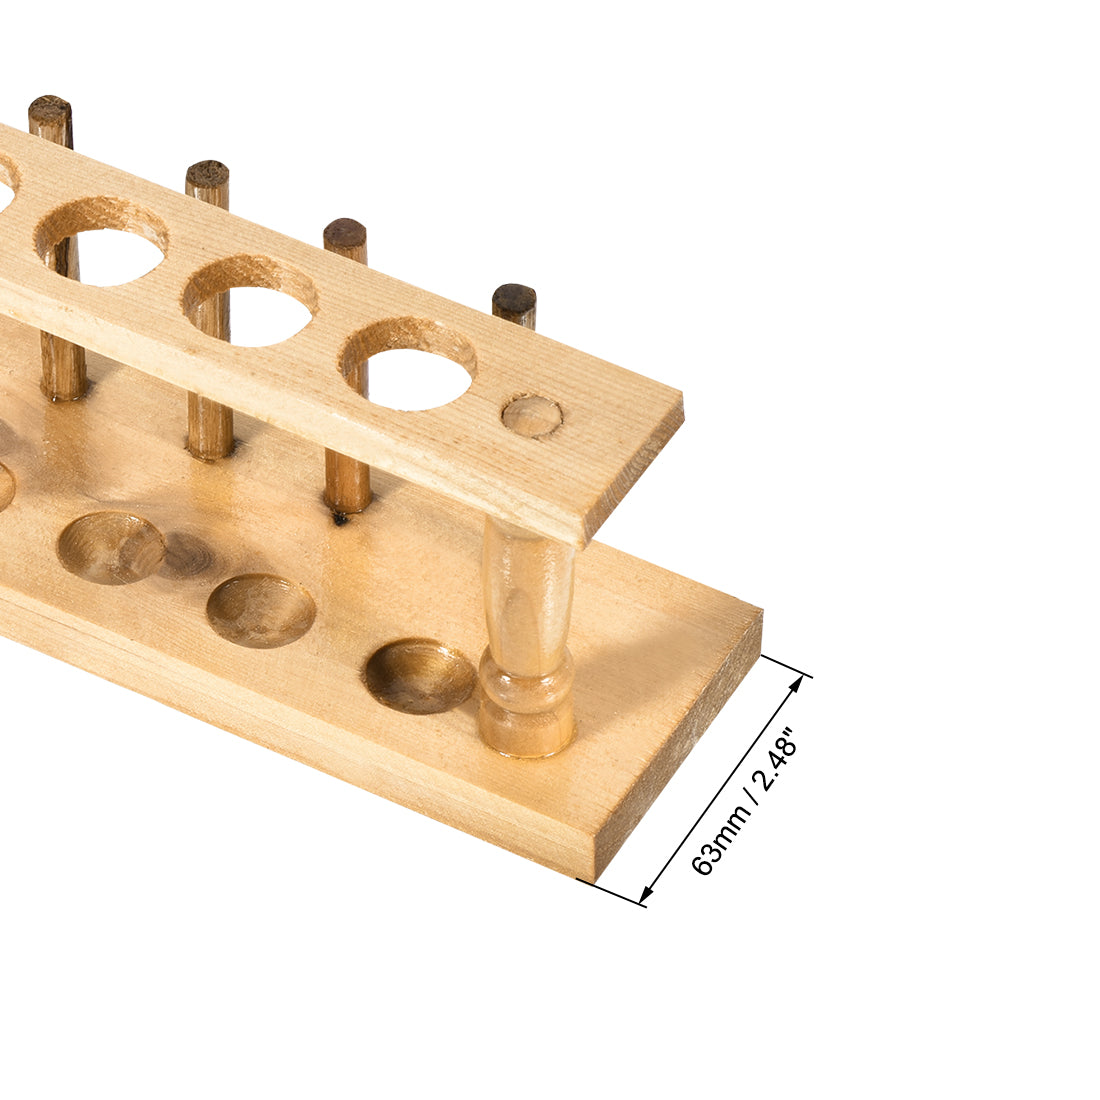 uxcell Uxcell Wooden Test Tube Holder Rack 8 Wells 8 Pins for 16-20mm Centrifuge Tubes